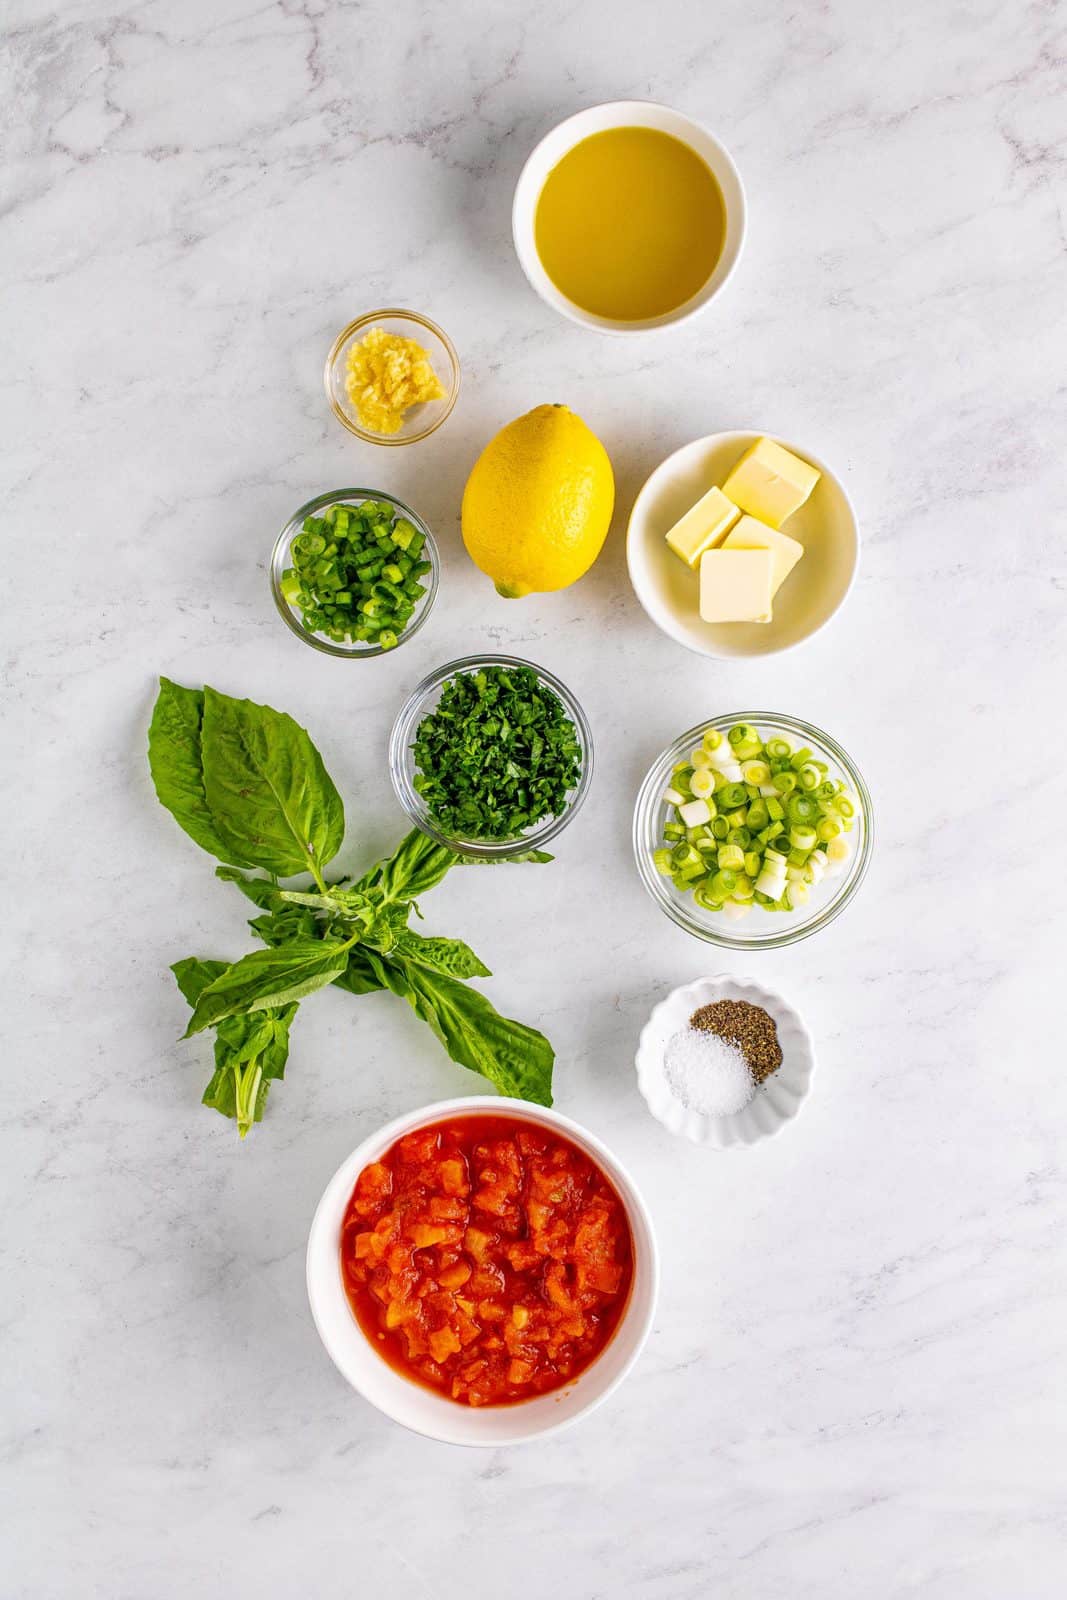 Ingredients needed: salted butter, olive oil, scallions, garlic, parsley, petite diced tomatoes, lemon juice, salt, pepper, basil leaves, and cooked pasta.